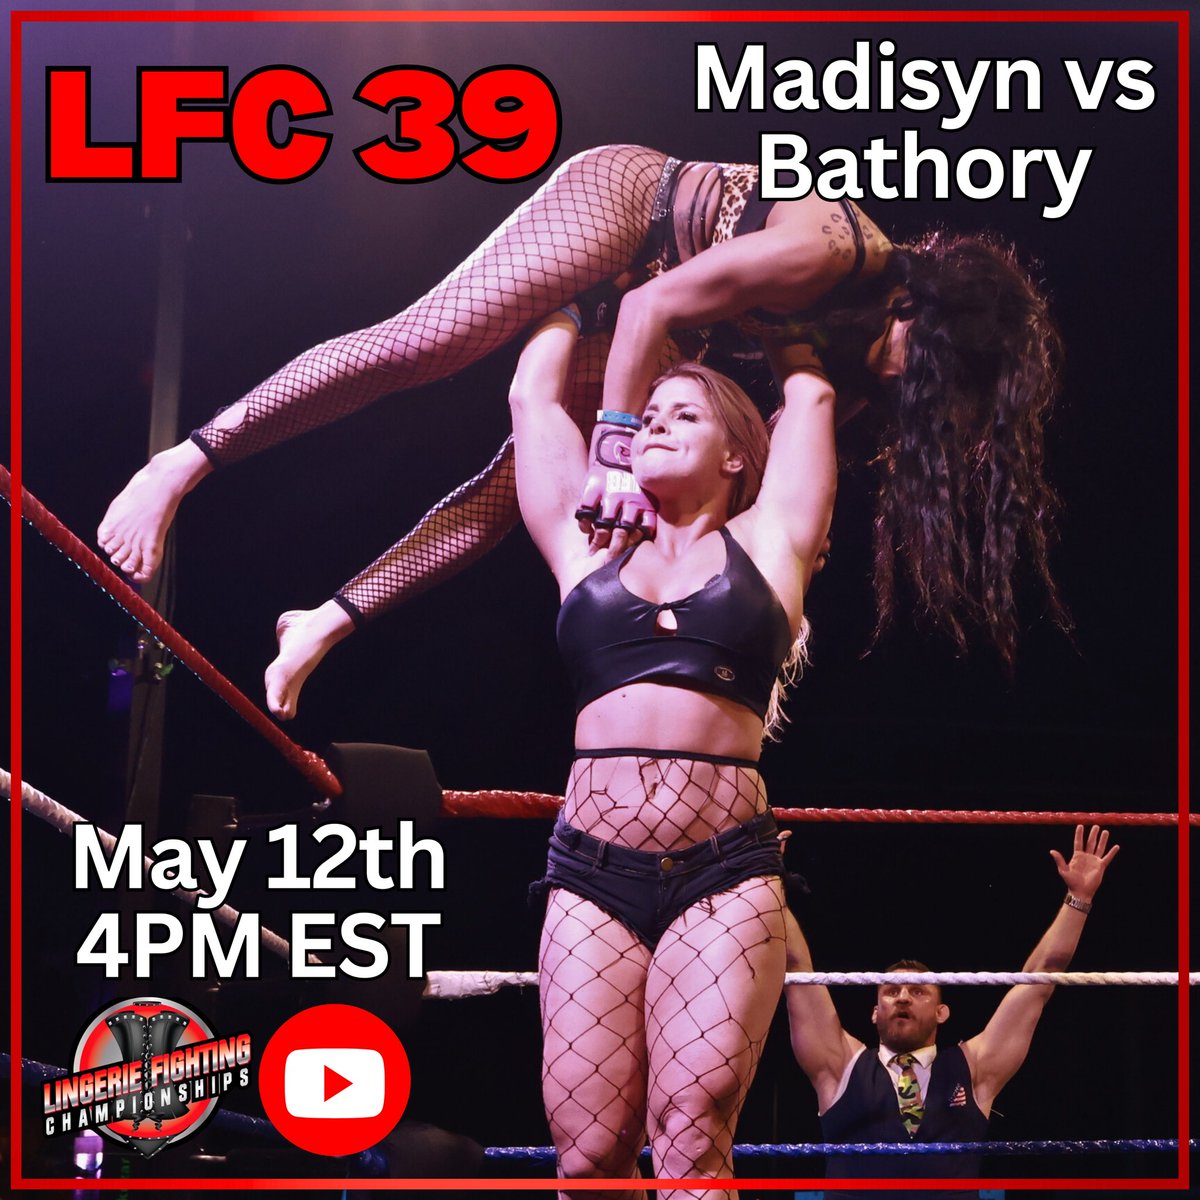 Are you ready for the fierce face-off at LFC 39! Bella Madisyn vs. Sheena Bathory. Every second counted! ⏳💪 #LFC39 #BellaMadisyn #SheenaBathory #EpicBattle